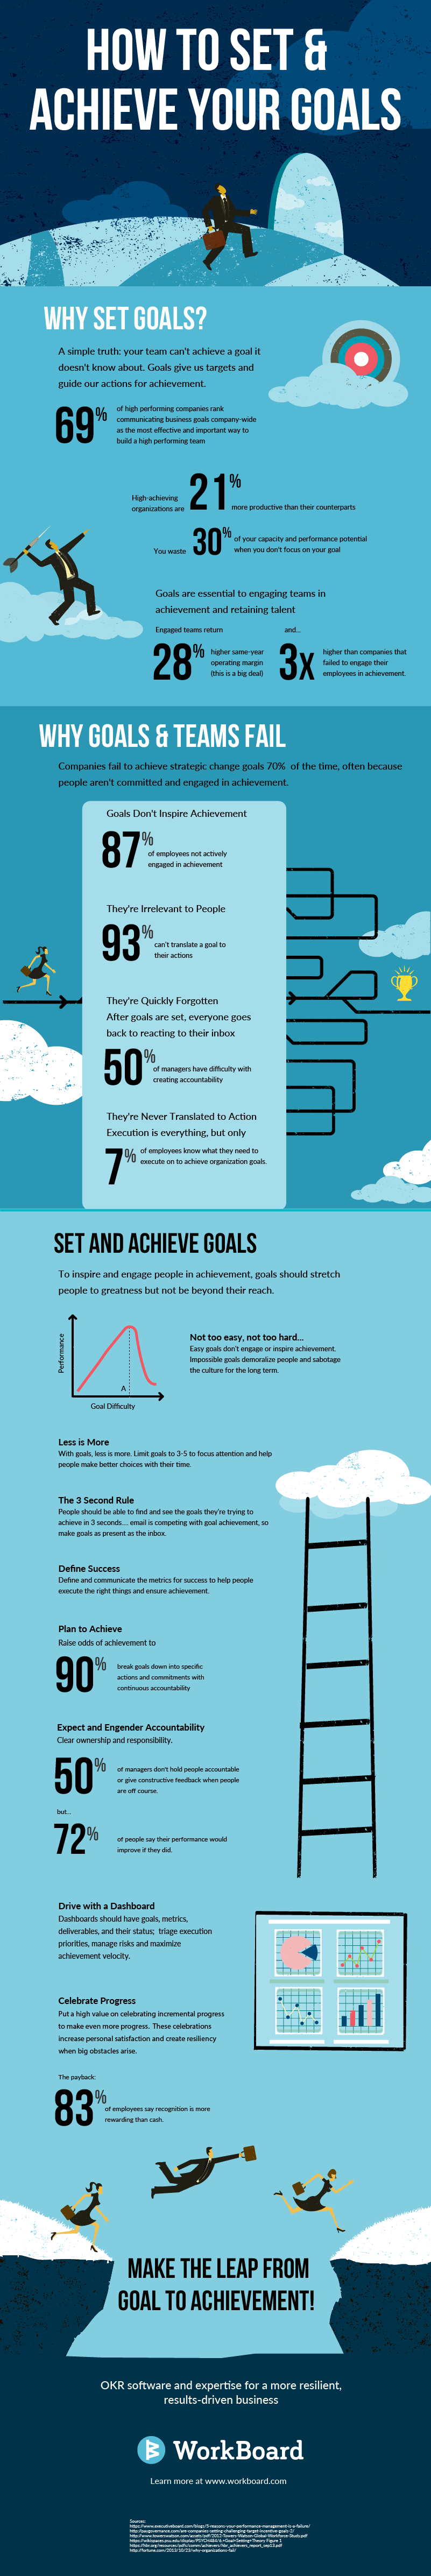 How to Set and Achieve Your Goals